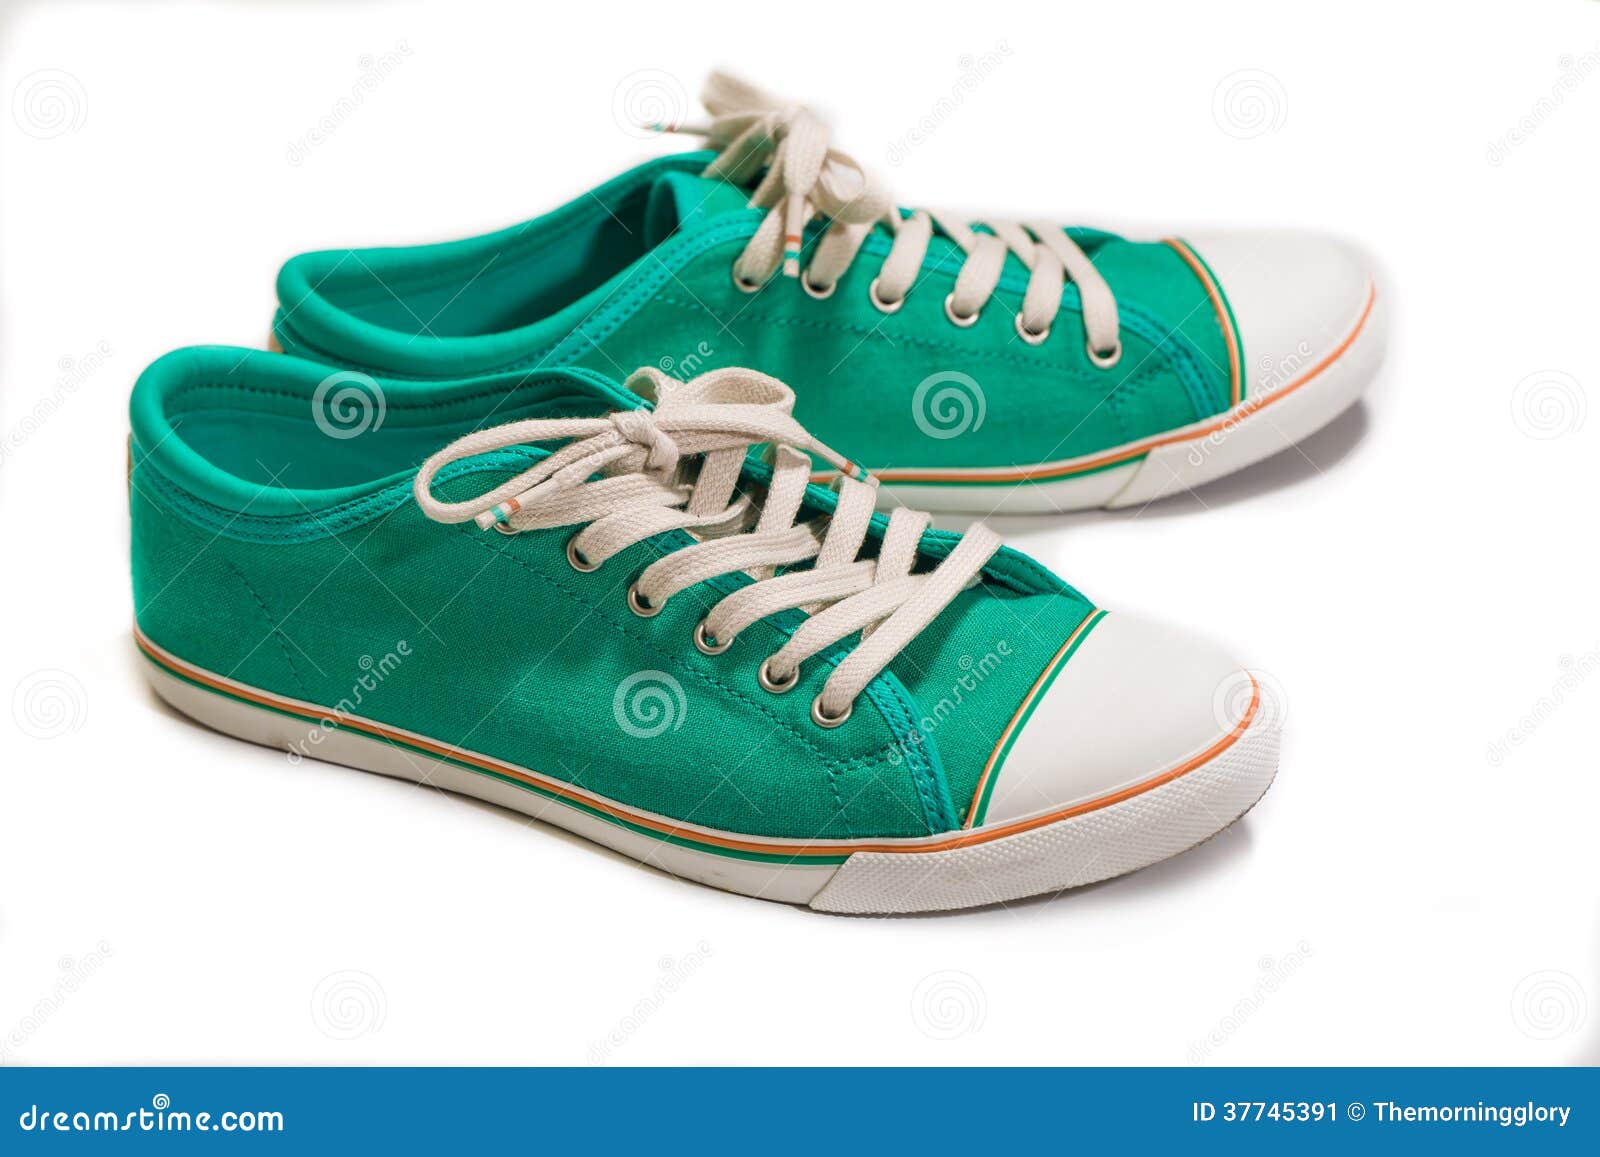 Vintage green shoes stock image. Image of boots, fashion - 37745391